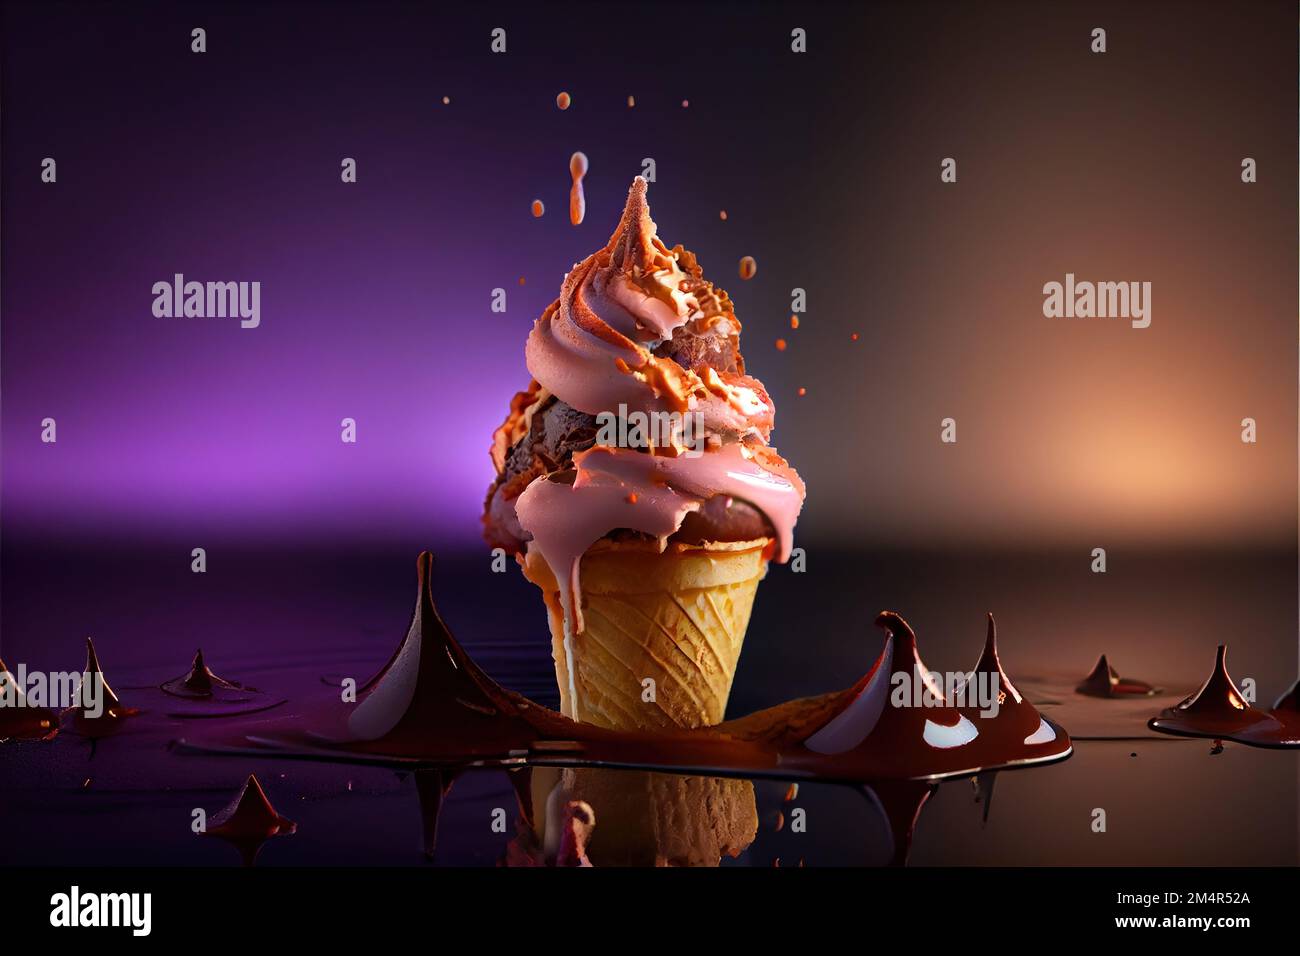 a chocolate ice cream cone with chocolate sauce on it and a purple background with drops of chocolate on the ice. . Stock Photo